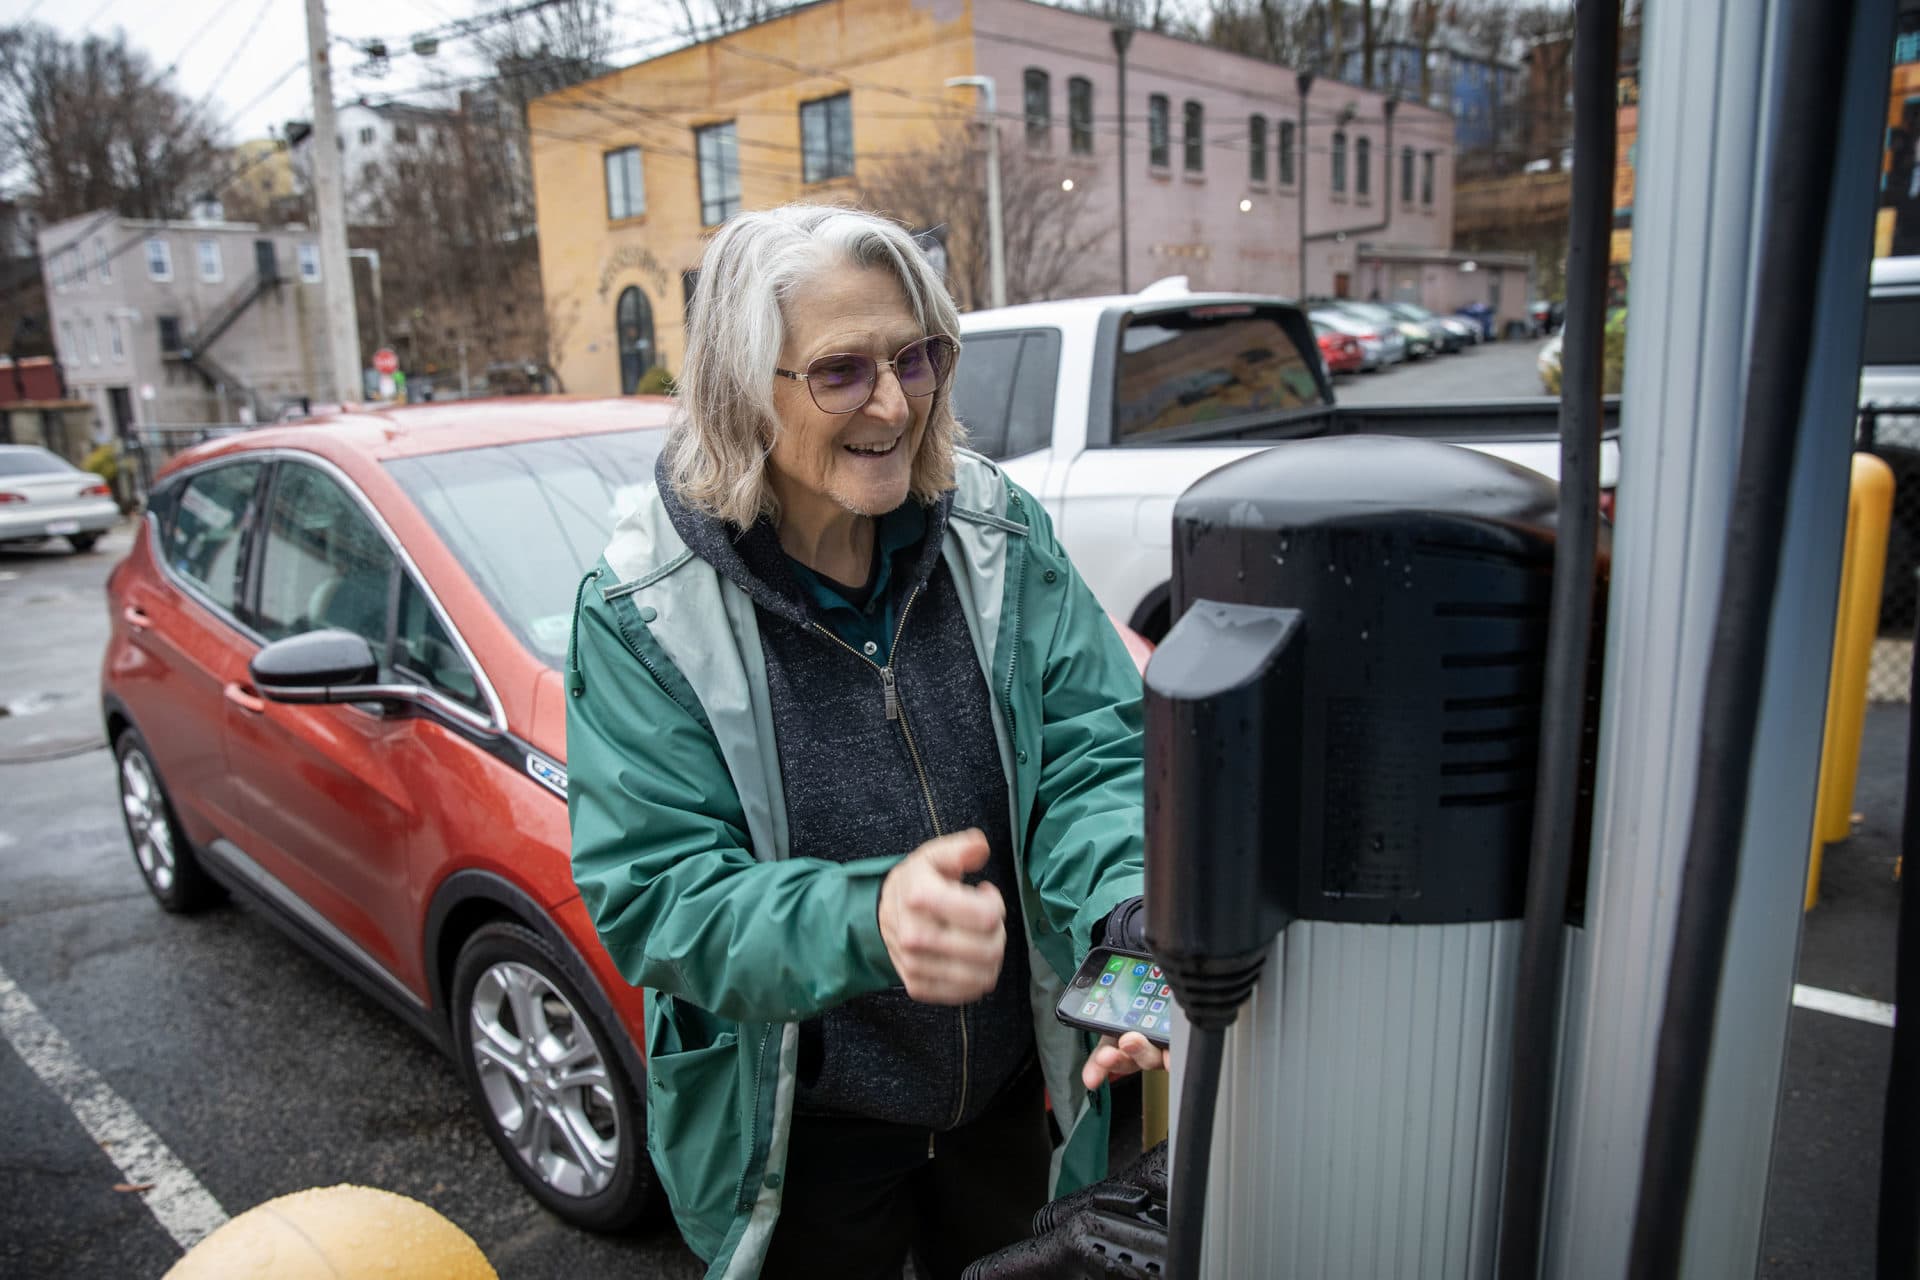 Loie Hayes wears a green rain coat and glasses, she's a white woman and has white hair. Hayes uses her phone to connect with a charging station in Boston. She doesn't have a driveway or garage and relies on public chargers in Mission Hill. (Credit: Robin Lubbock/WBUR)